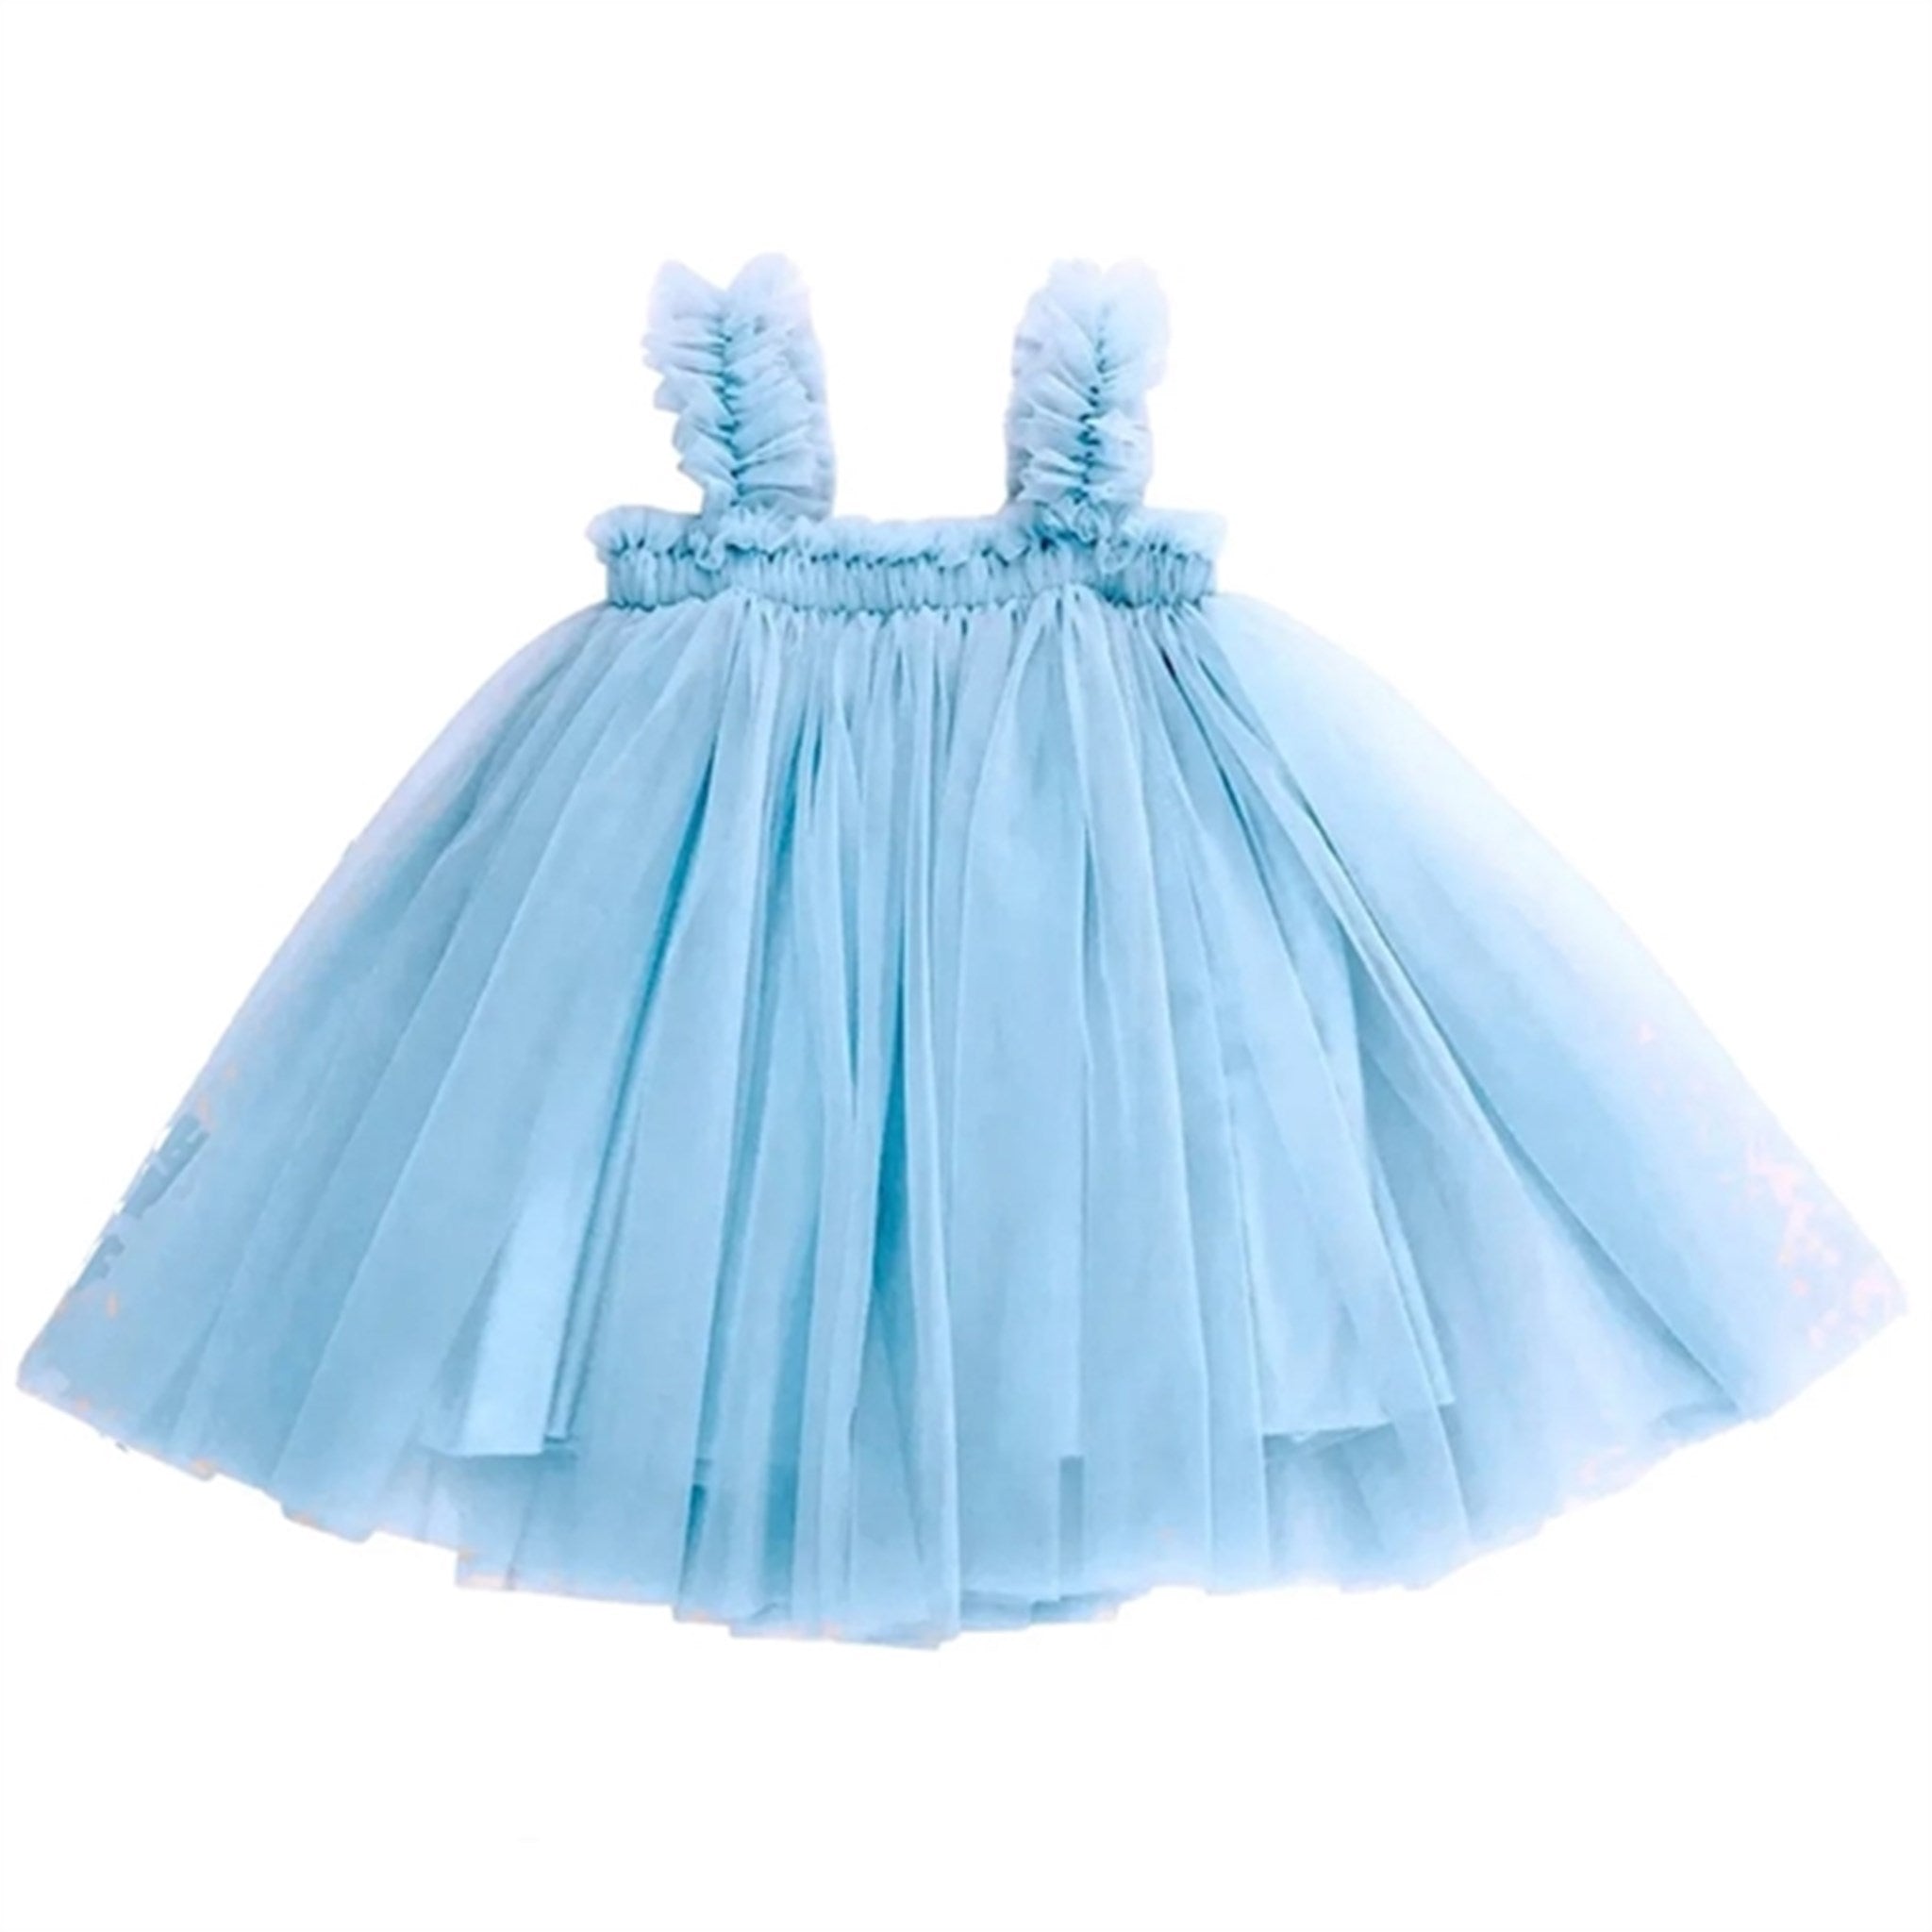 Dolly by Le Petit Tom Tutu Dress Beach Cover Up Ballet Blue